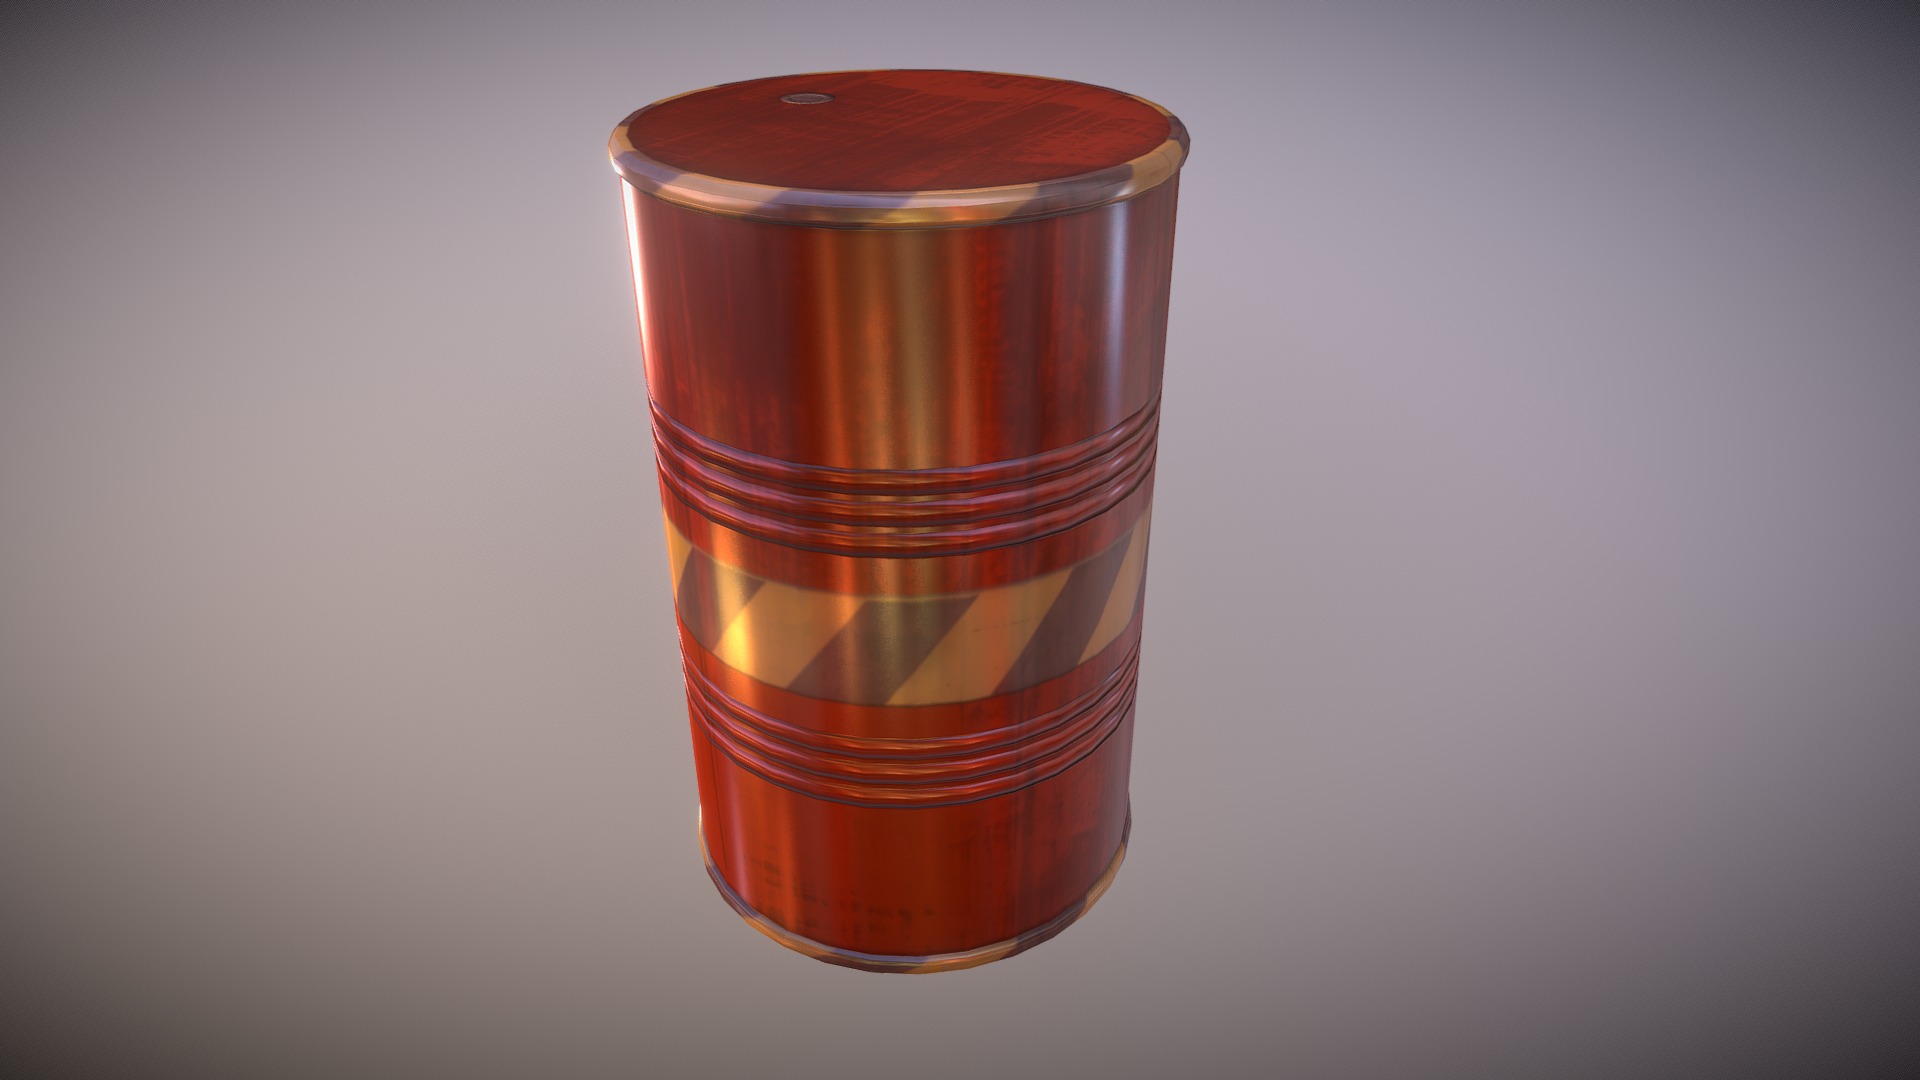 3D model Barrel - This is a 3D model of the Barrel. The 3D model is about a glass jar with a brown lid.